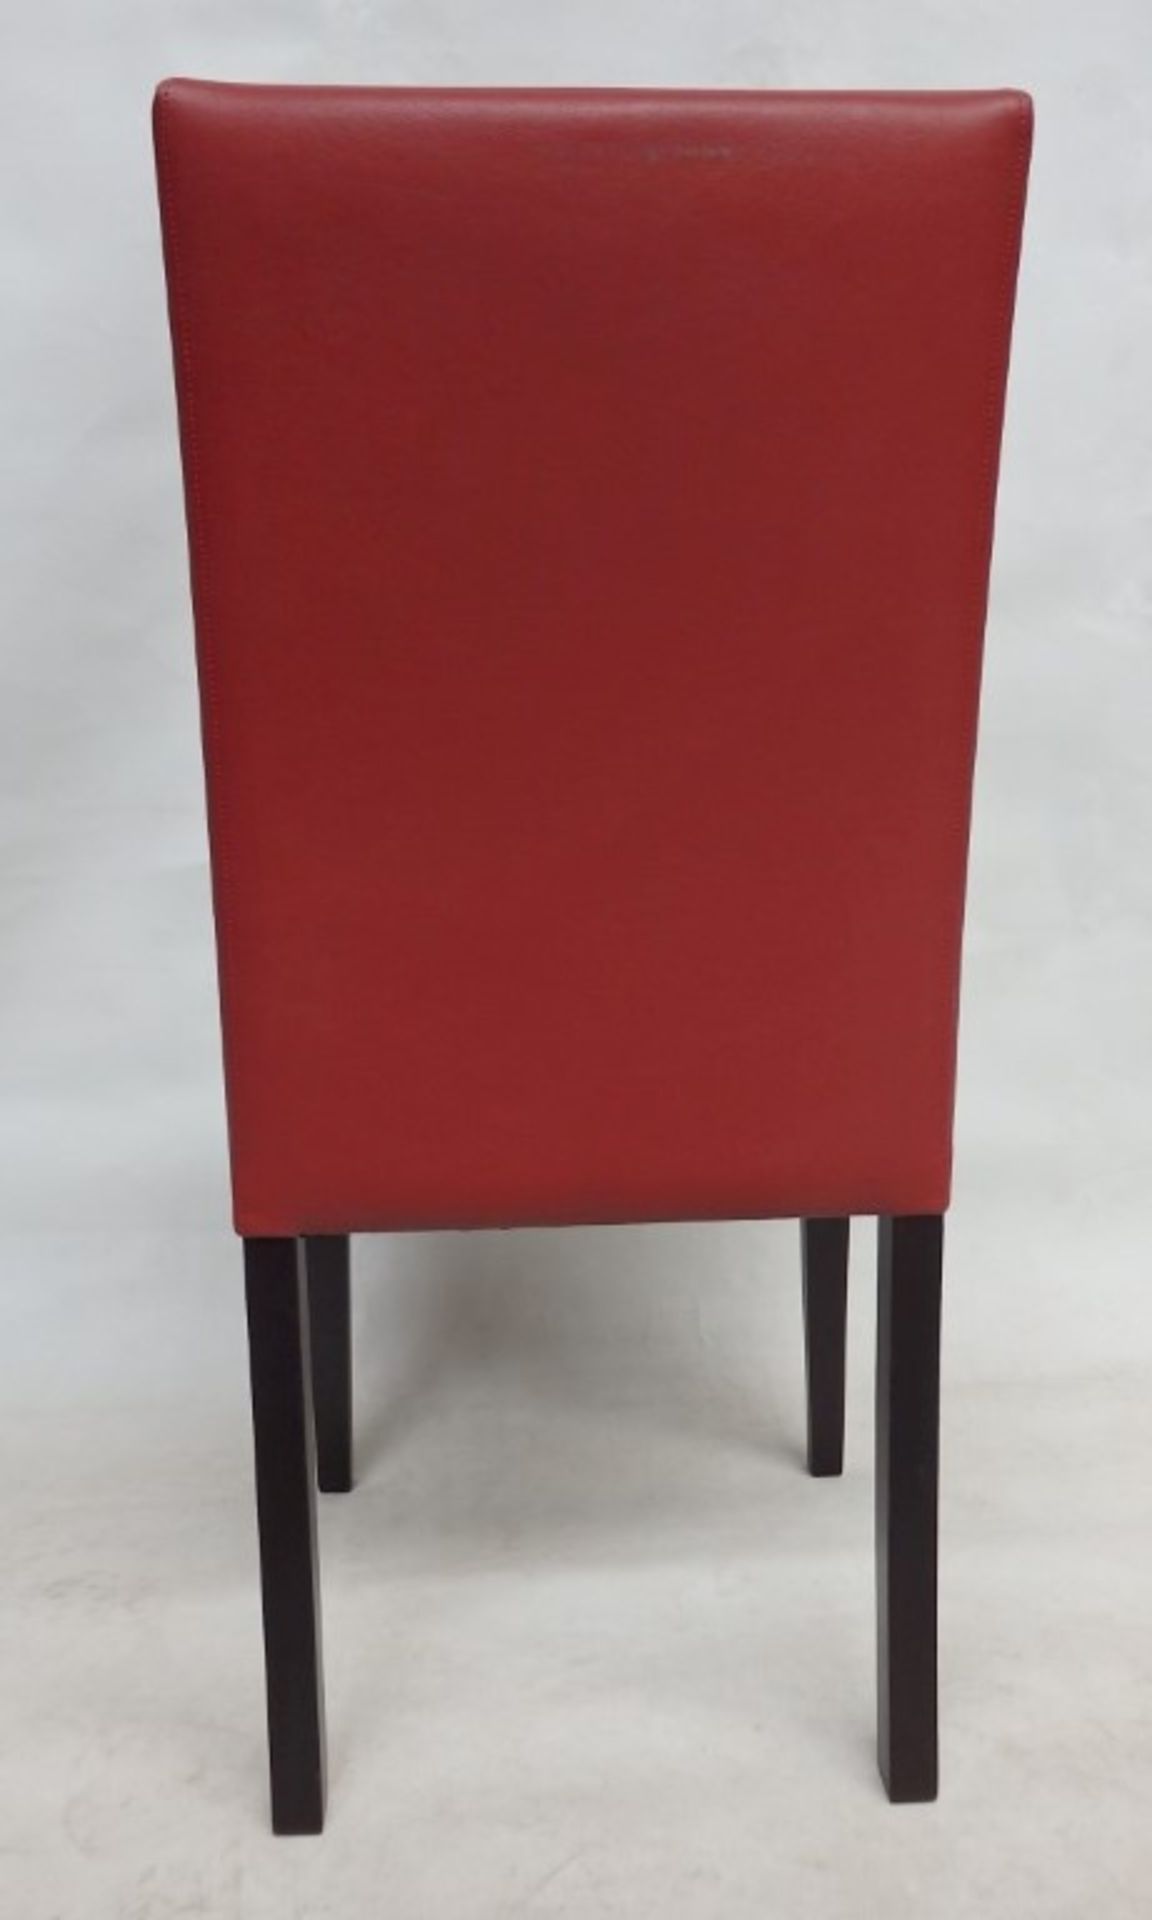 1 x Bespoke Chair Upholstered In A Deep Red Leather - Handcrafted & Upholstered By British Craftsmen - Image 3 of 3